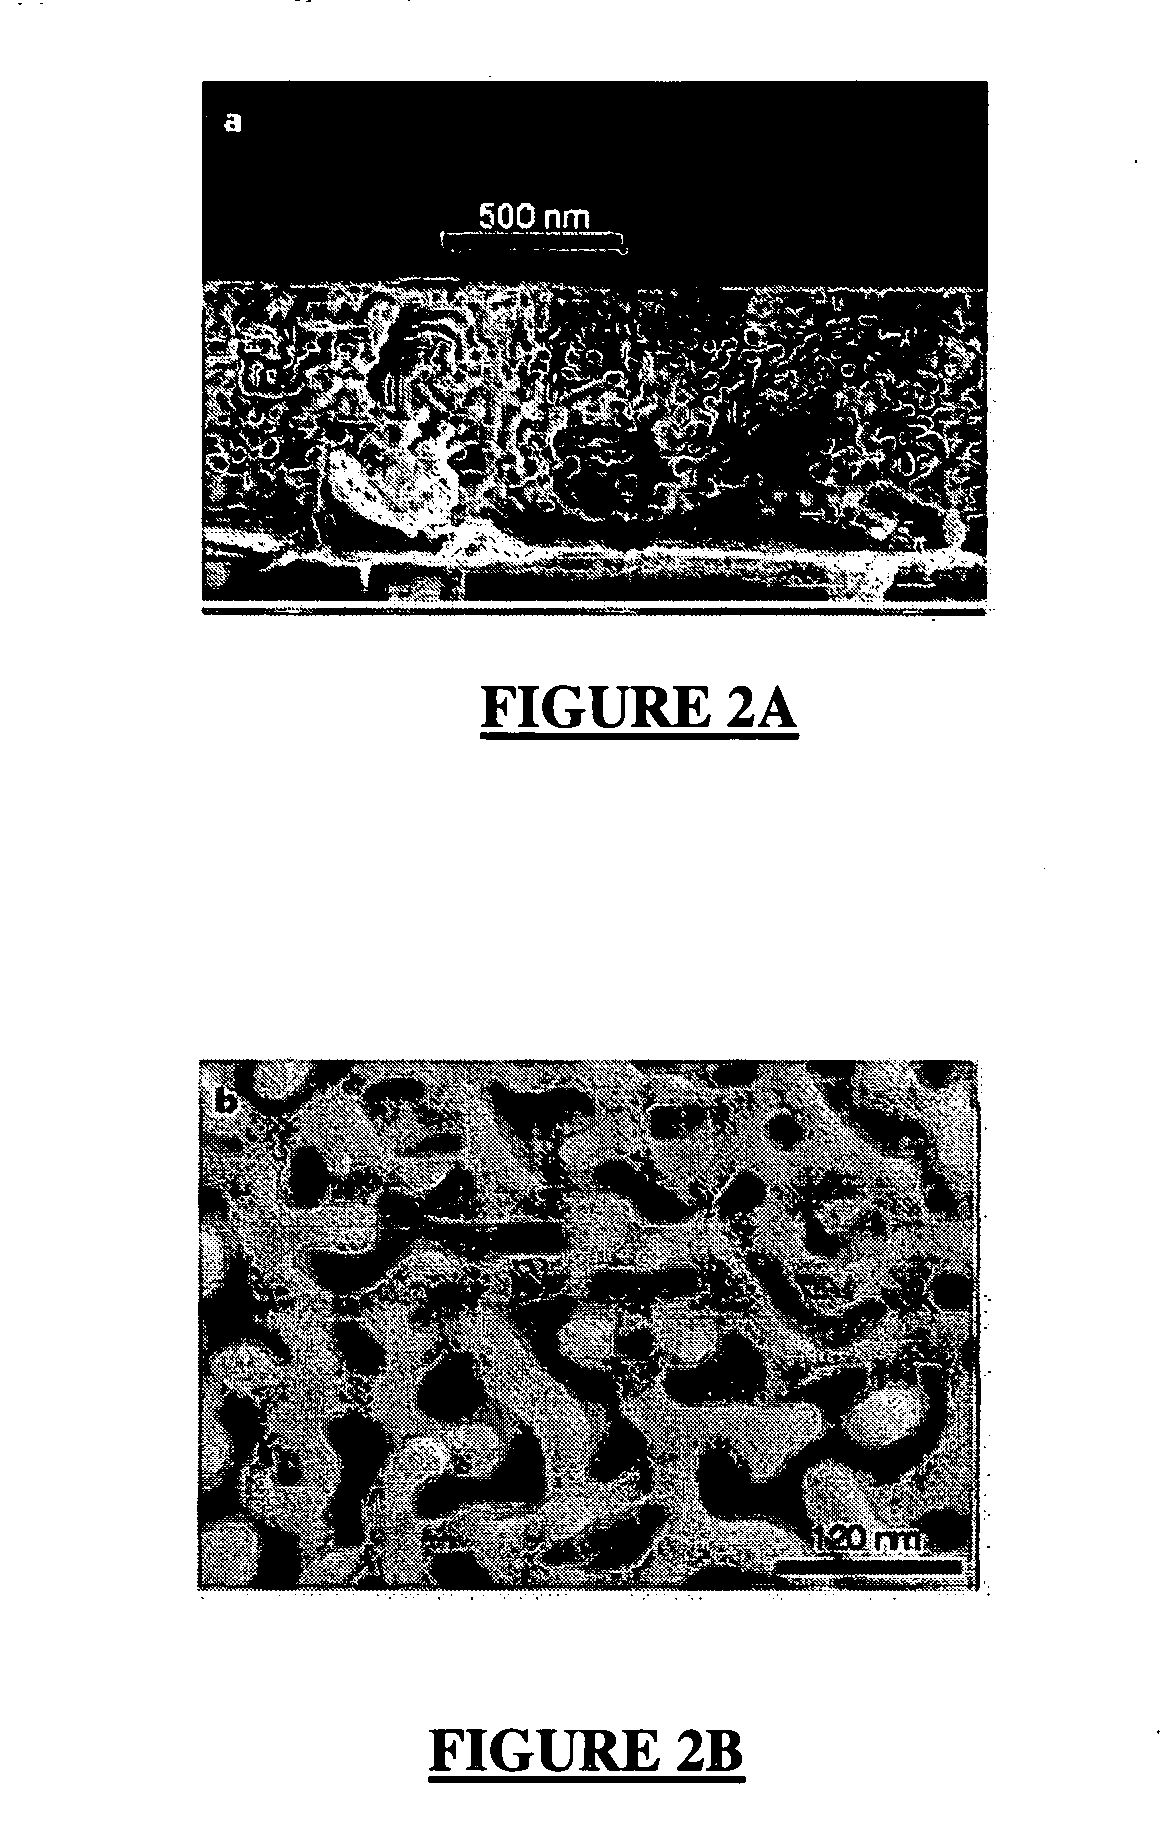 Medical devices composed of porous metallic materials for delivering biologically active materials